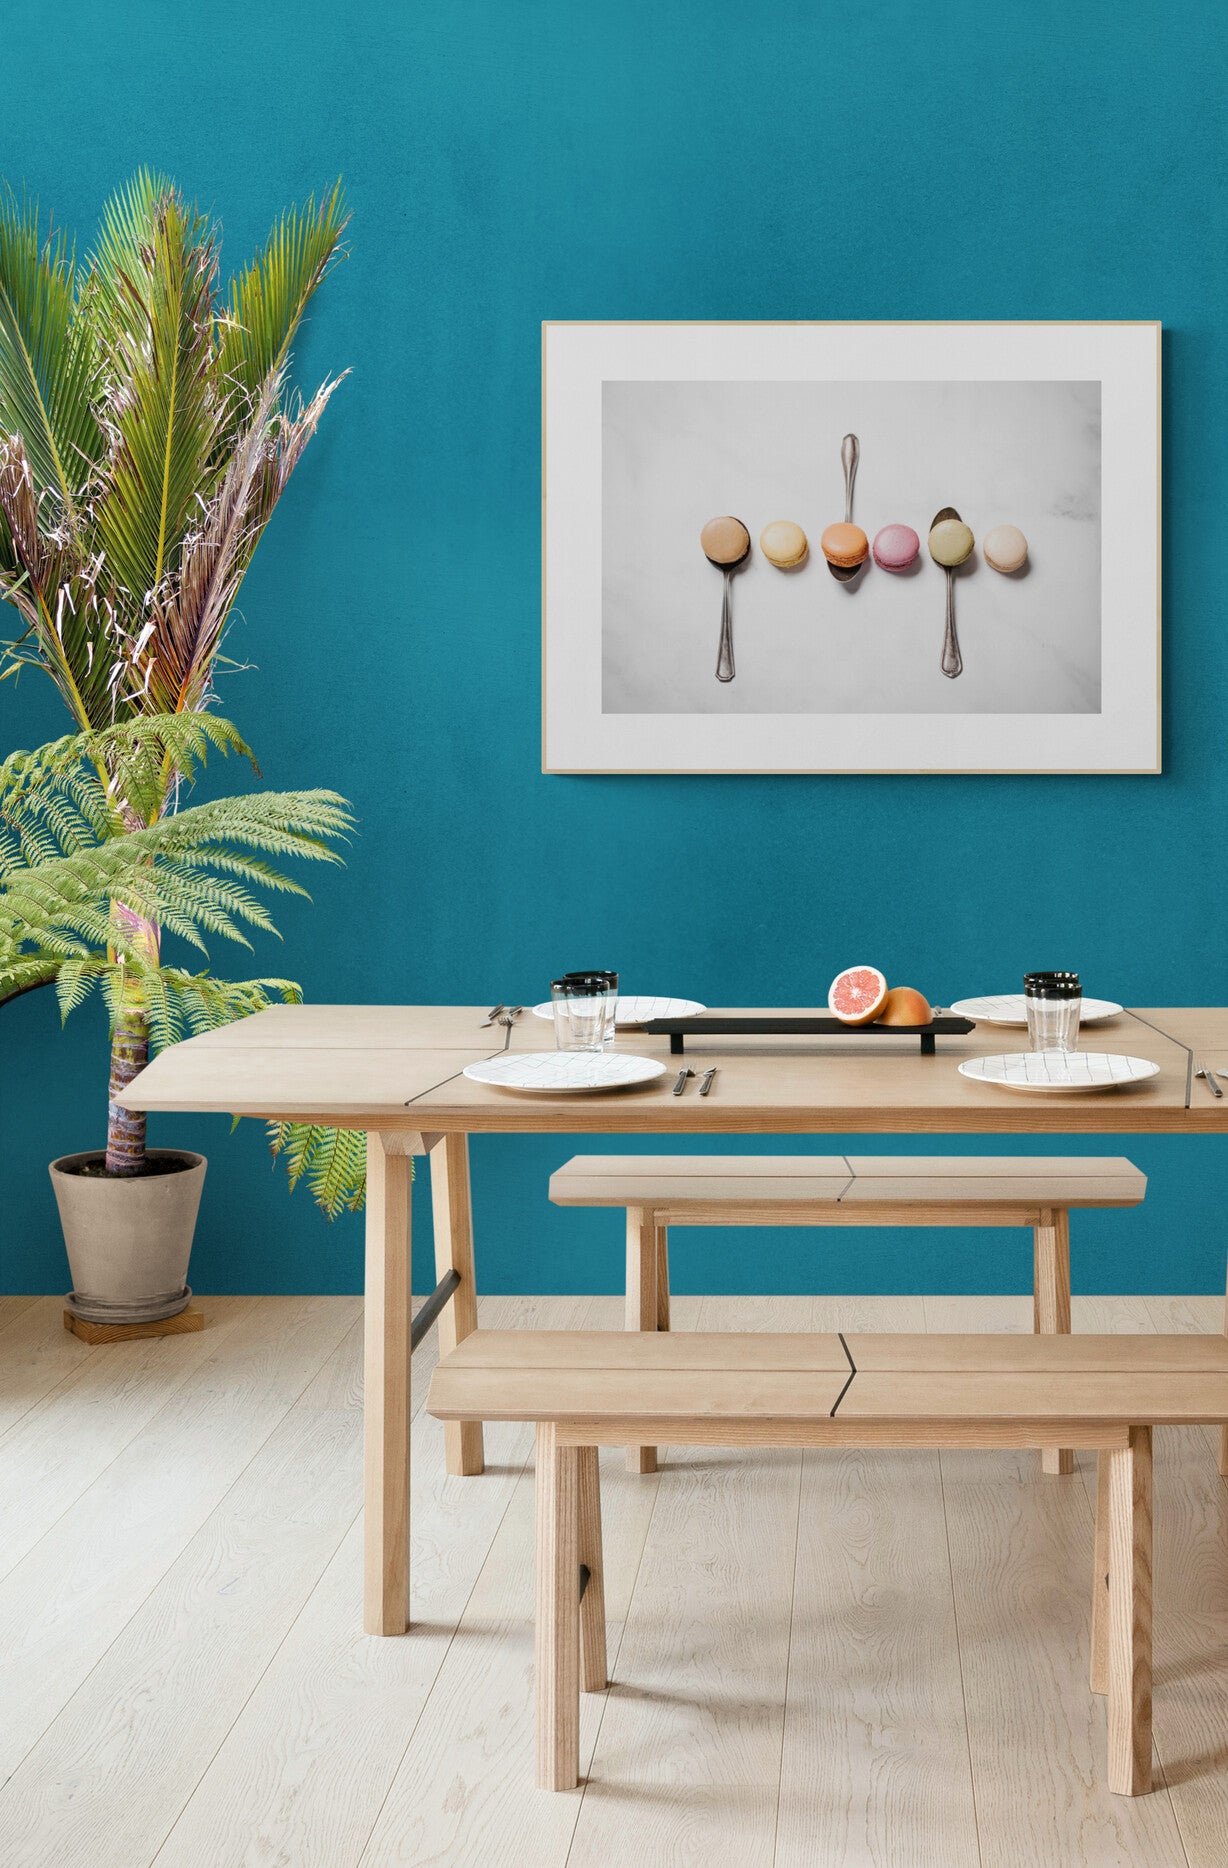 Pastel Macarons photograph print framed in a kitchen nook as wall art